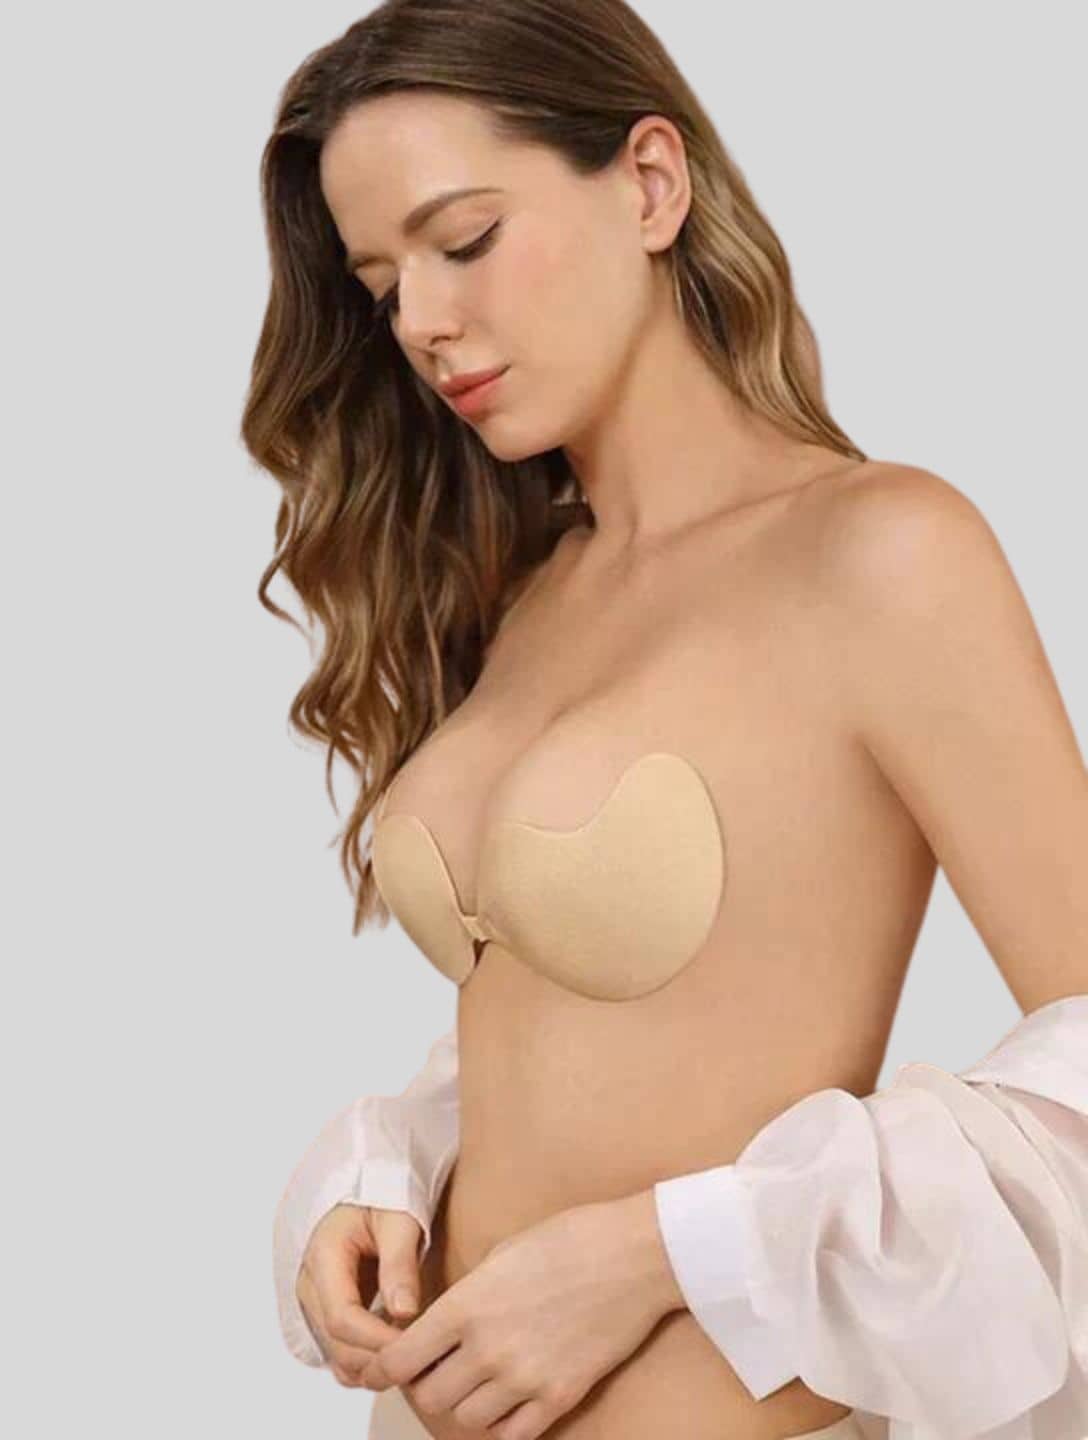 HOW TO GET CLEAVAGE WITH A STRAPLESS BRA - UpBra review! 